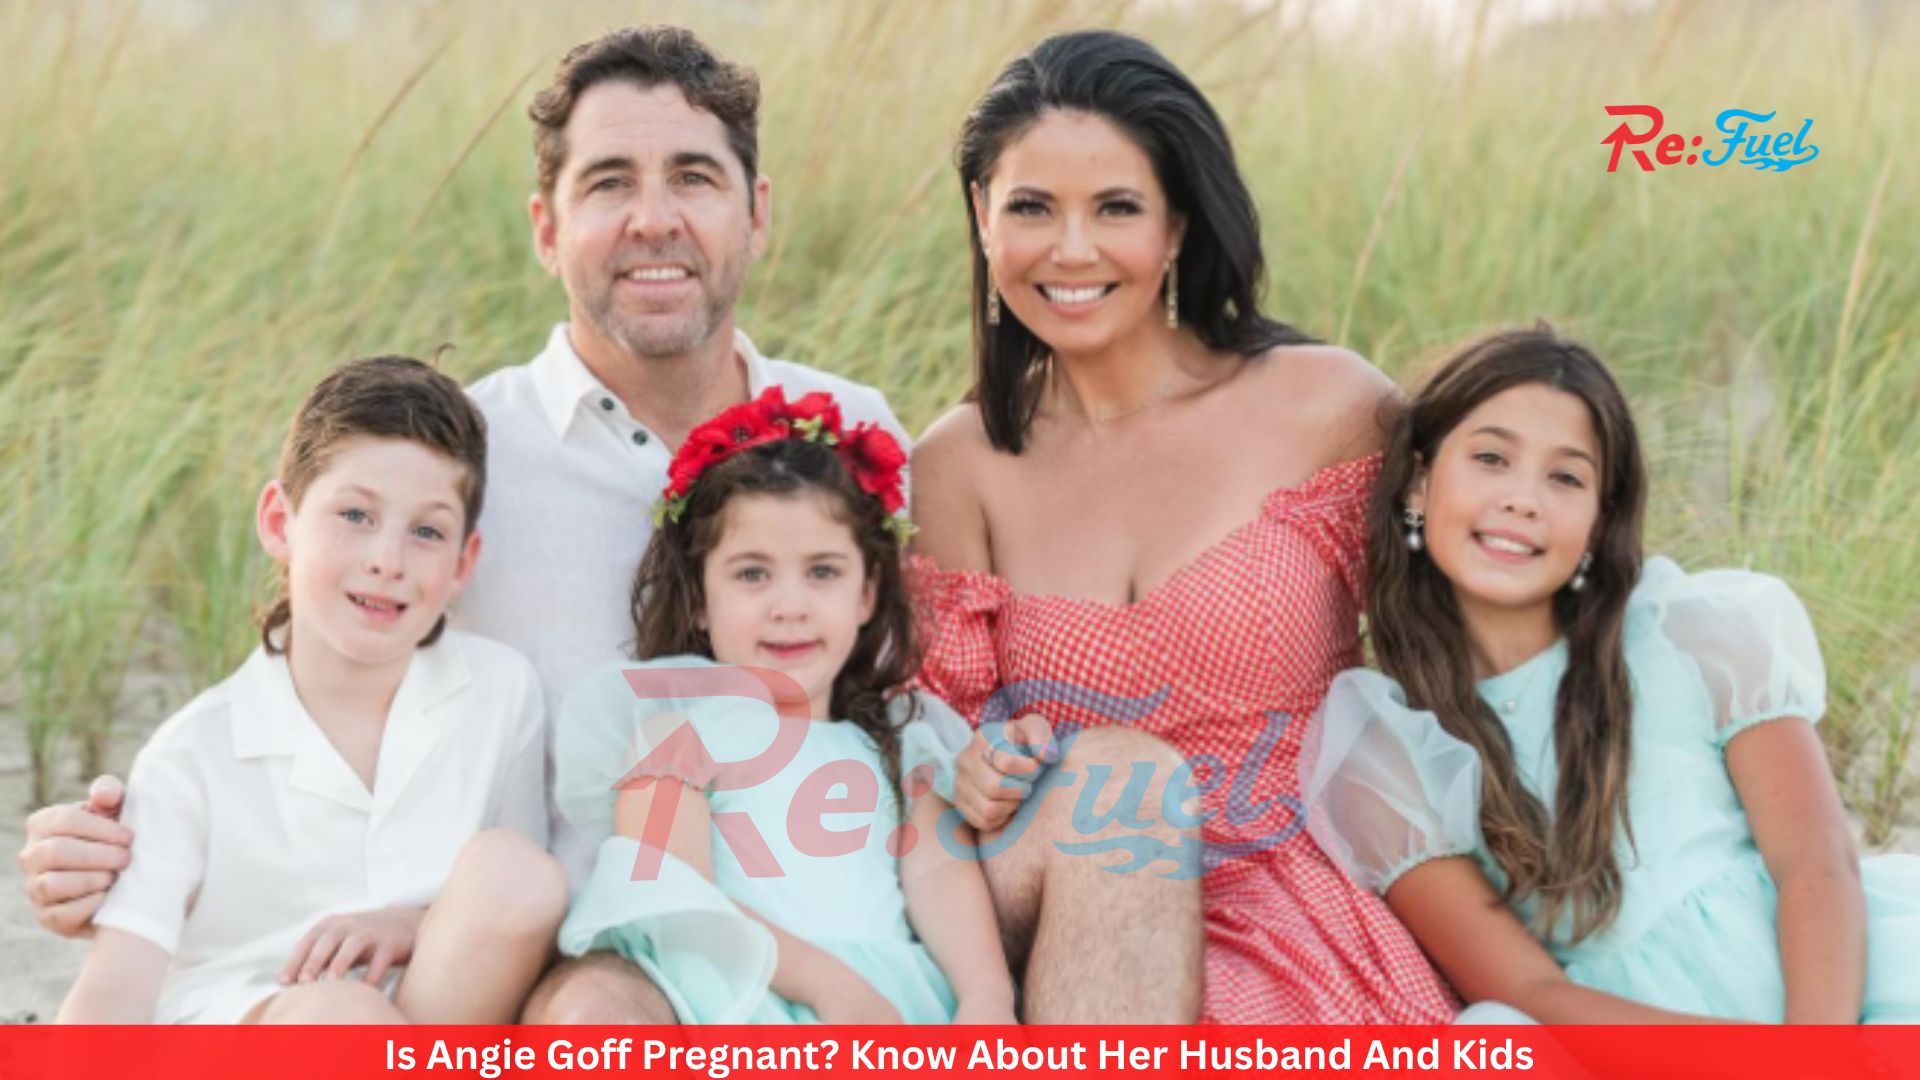 Is Angie Goff Pregnant? Know About Her Husband And Kids